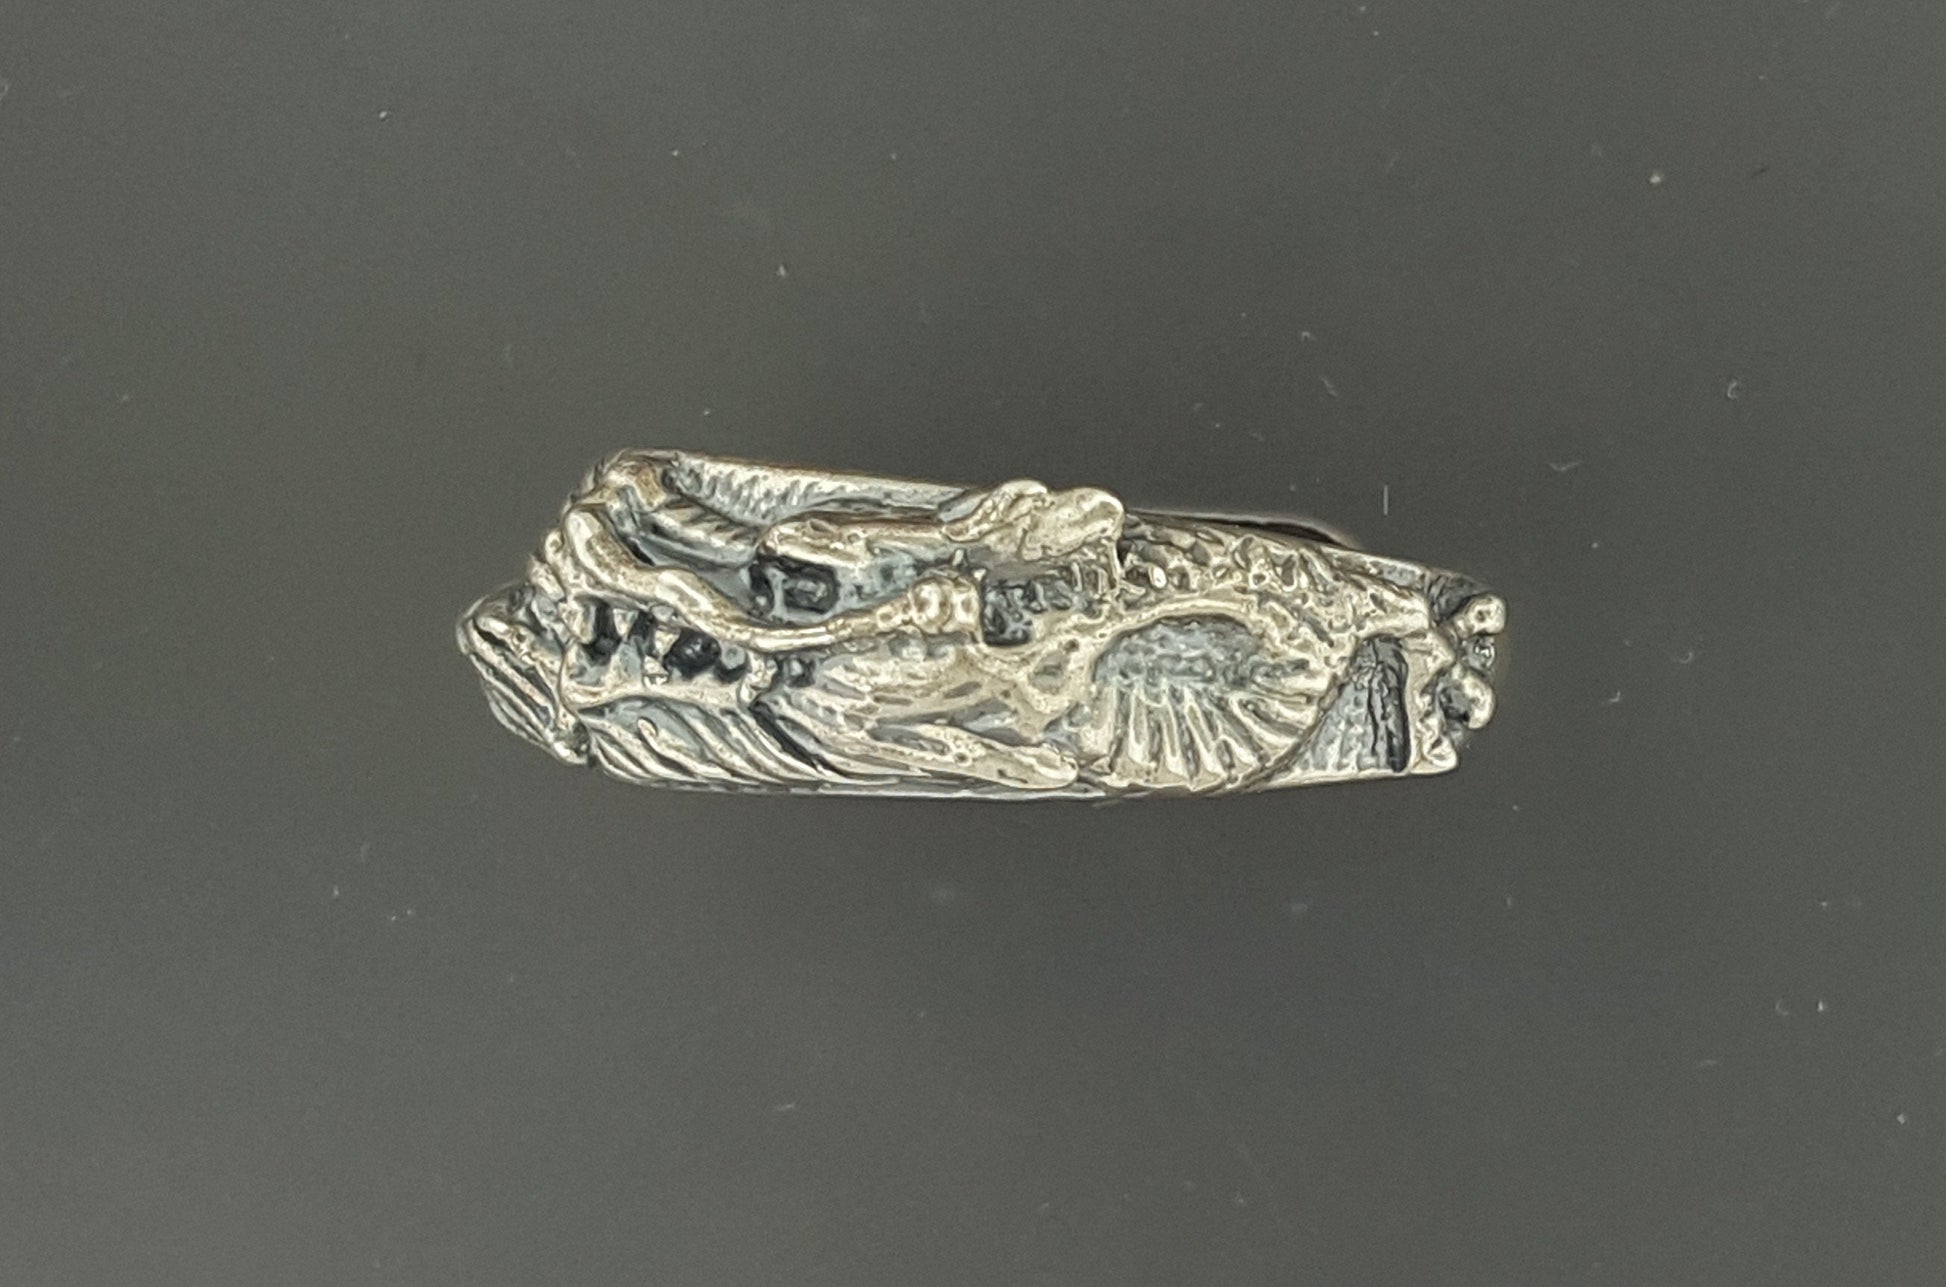 Asian Dragon Band In Sterling Silver or Antique Bronze, Bronze Dragon Ring, Asian Dragon Ring, Bronze Dragon Band, Here Be Dragons, Bronze Fantasy Jewelry, Bronze Fantasy Jewellery, Antique Bronze Dragon Ring, Chinese Dragon Ring, Mens Dragon Ring, Mens Bronze Dragon Ring, Mens Bronze Dragon Jewelry, Mens Bronze Dragon Jewellery